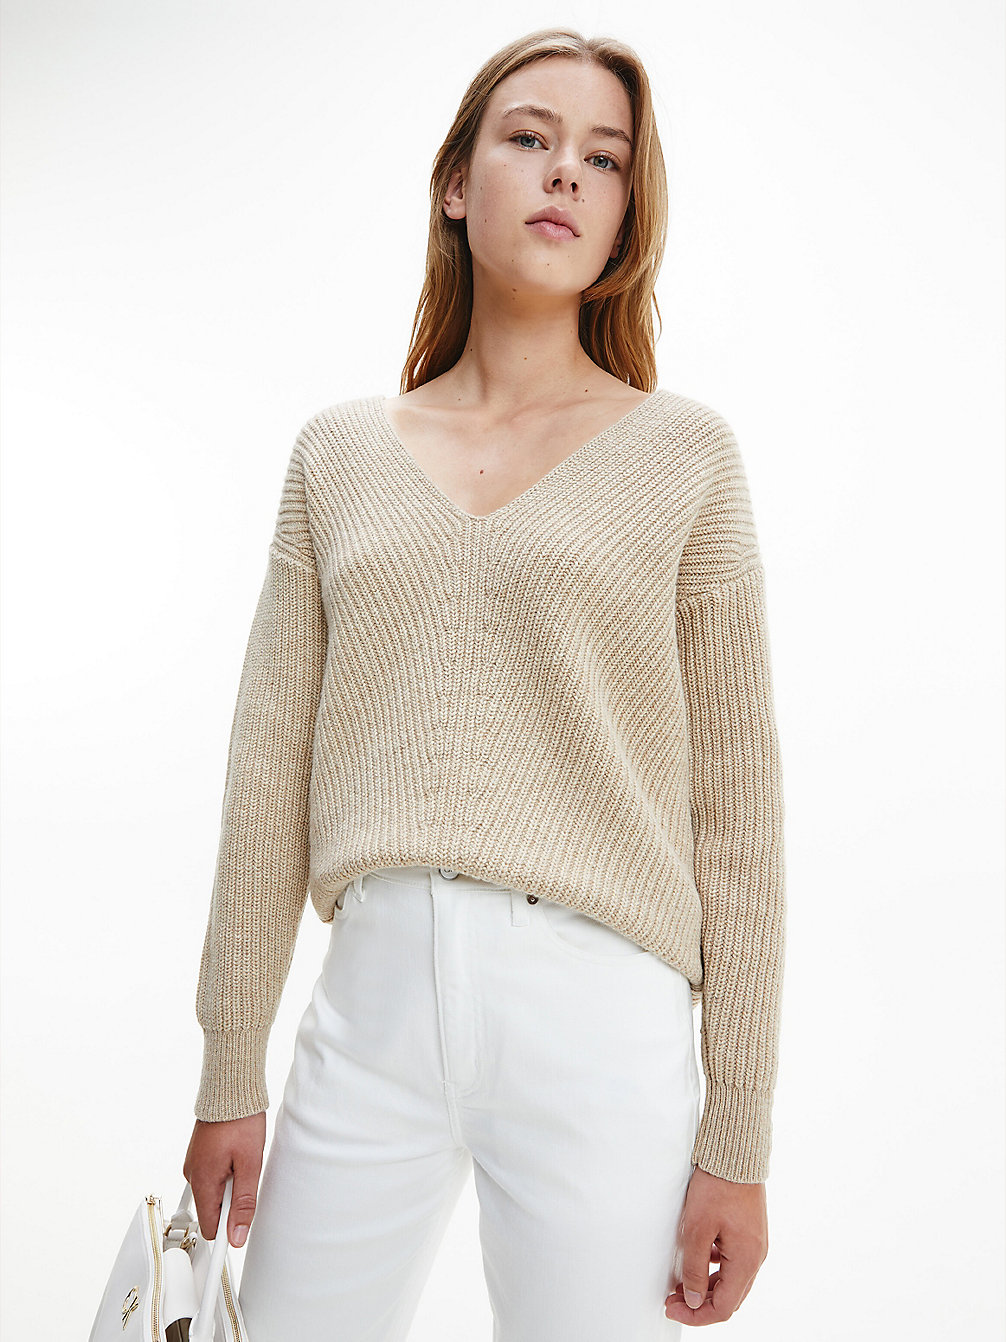 Maglione In Misto Lana Modello Relaxed > MOCCASIN HEATHER > undefined donna > Calvin Klein